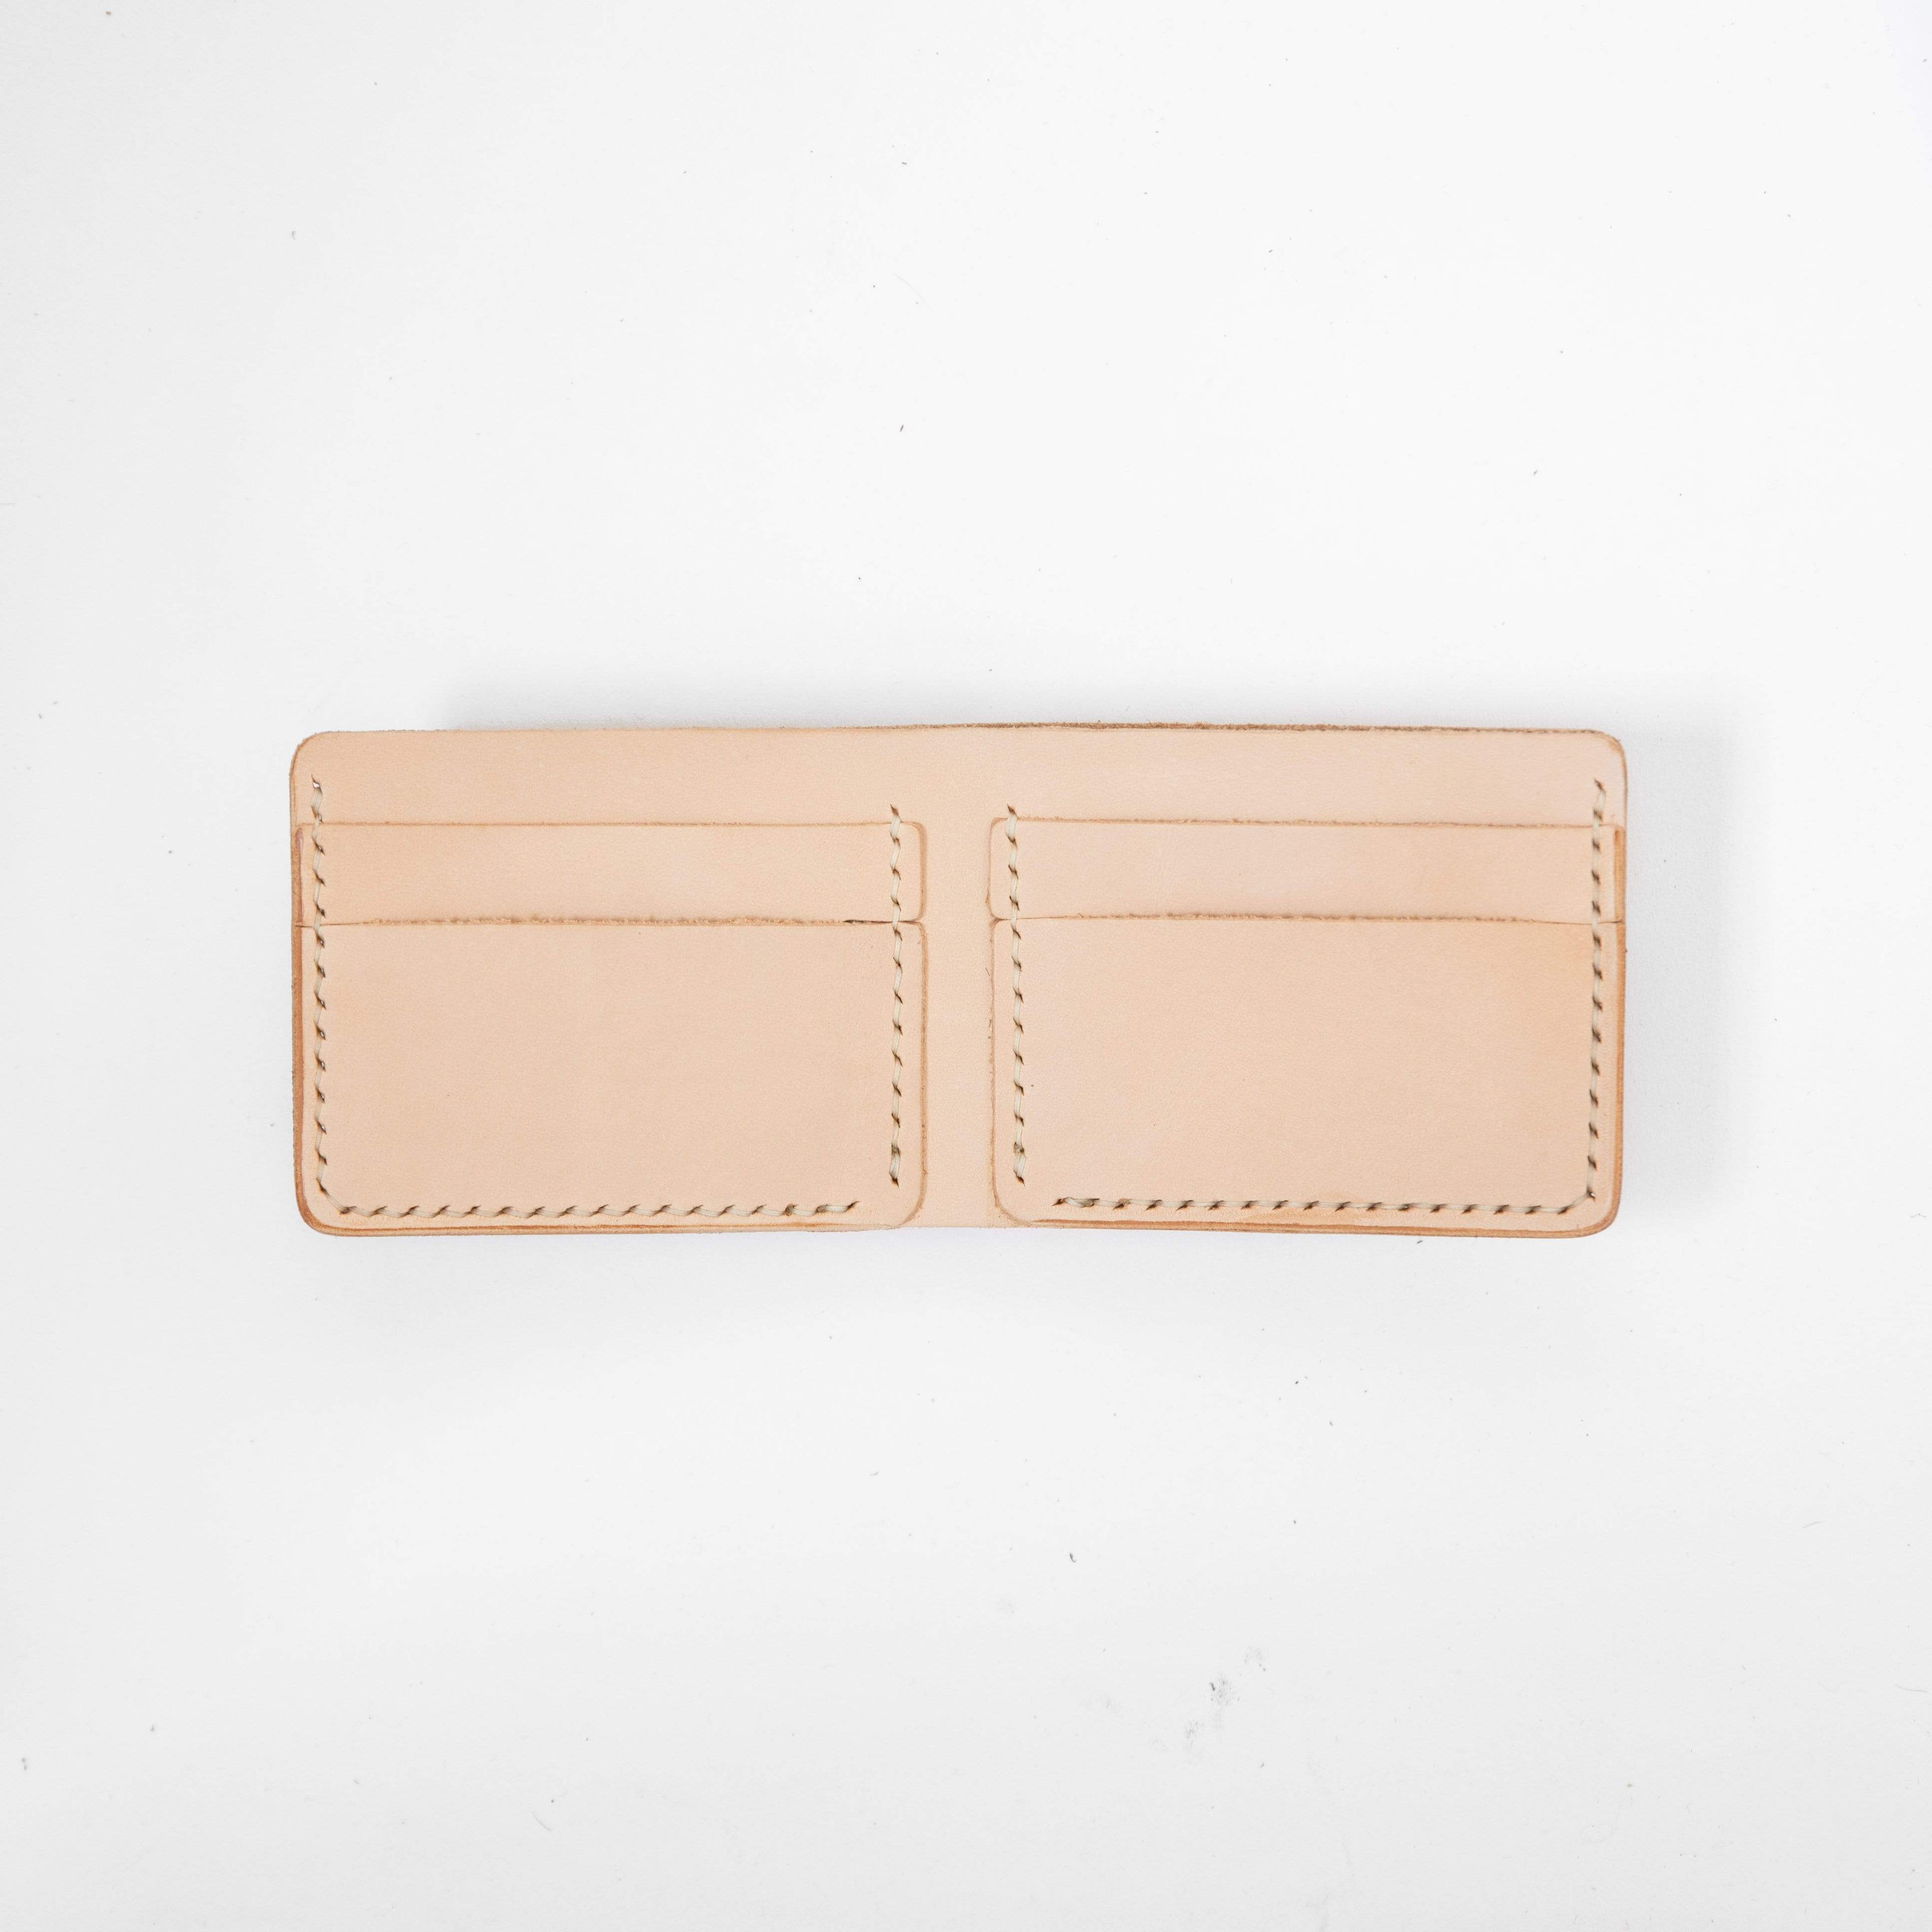 DIY Leather Bifold Wallet Kit - Do It Your Own Vegetable Tanned Natural Leather  Wallet - Black 